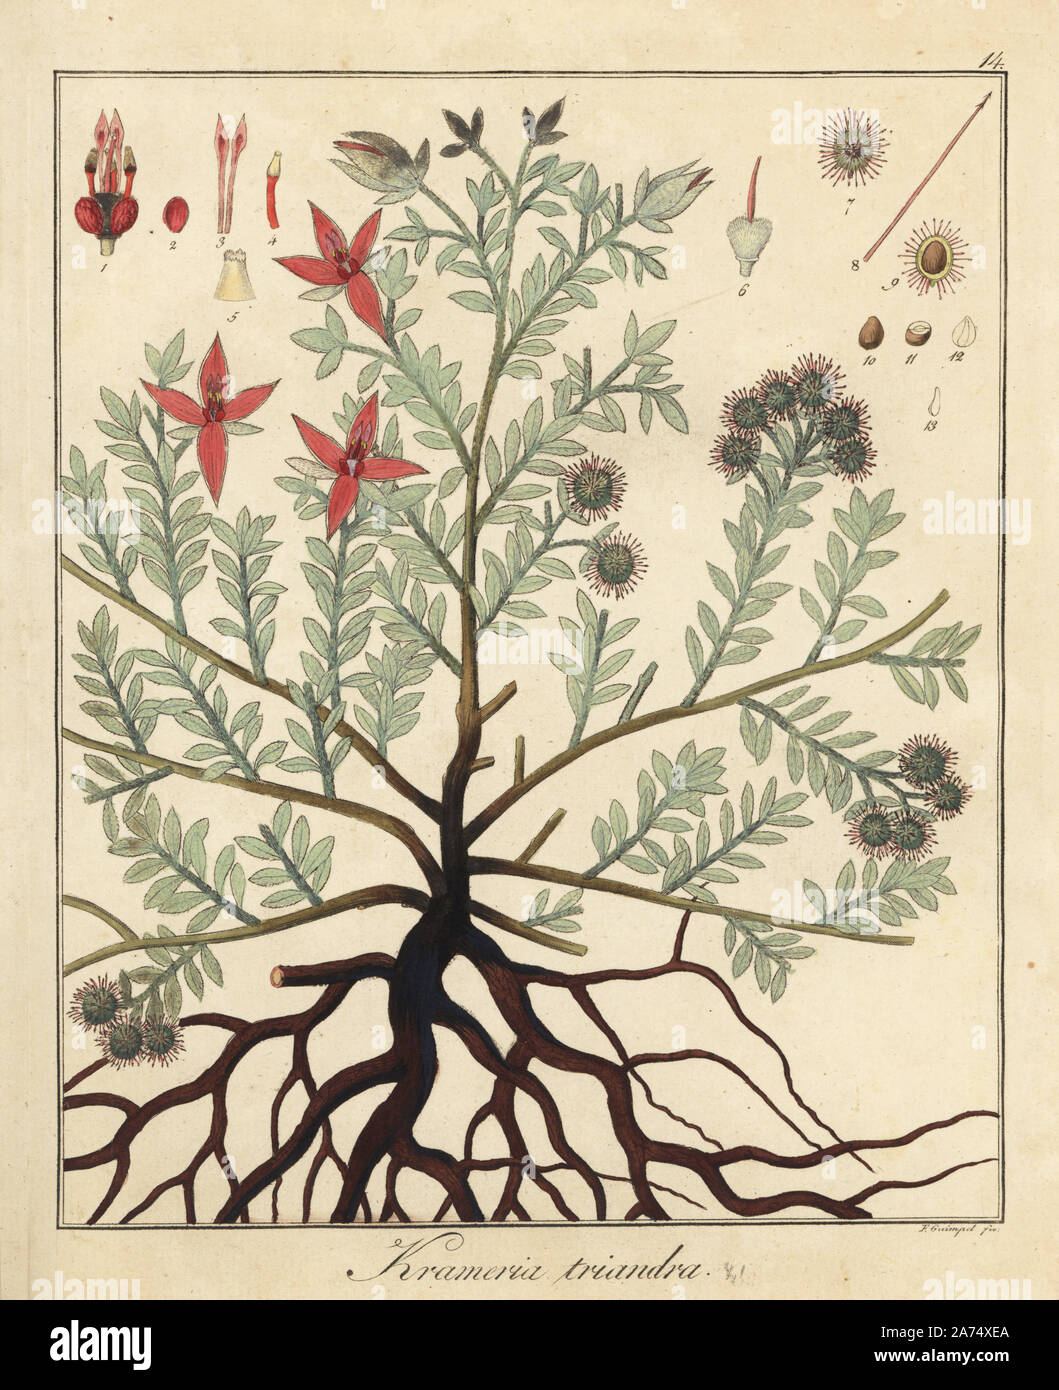 Rhatany, Krameria triandra. Handcoloured copperplate engraving by F. Guimpel from Dr. Friedrich Gottlob Hayne's Medical Botany, Berlin, 1822. Hayne (1763-1832) was a German botanist, apothecary and professor of pharmaceutical botany at Berlin University. Stock Photo